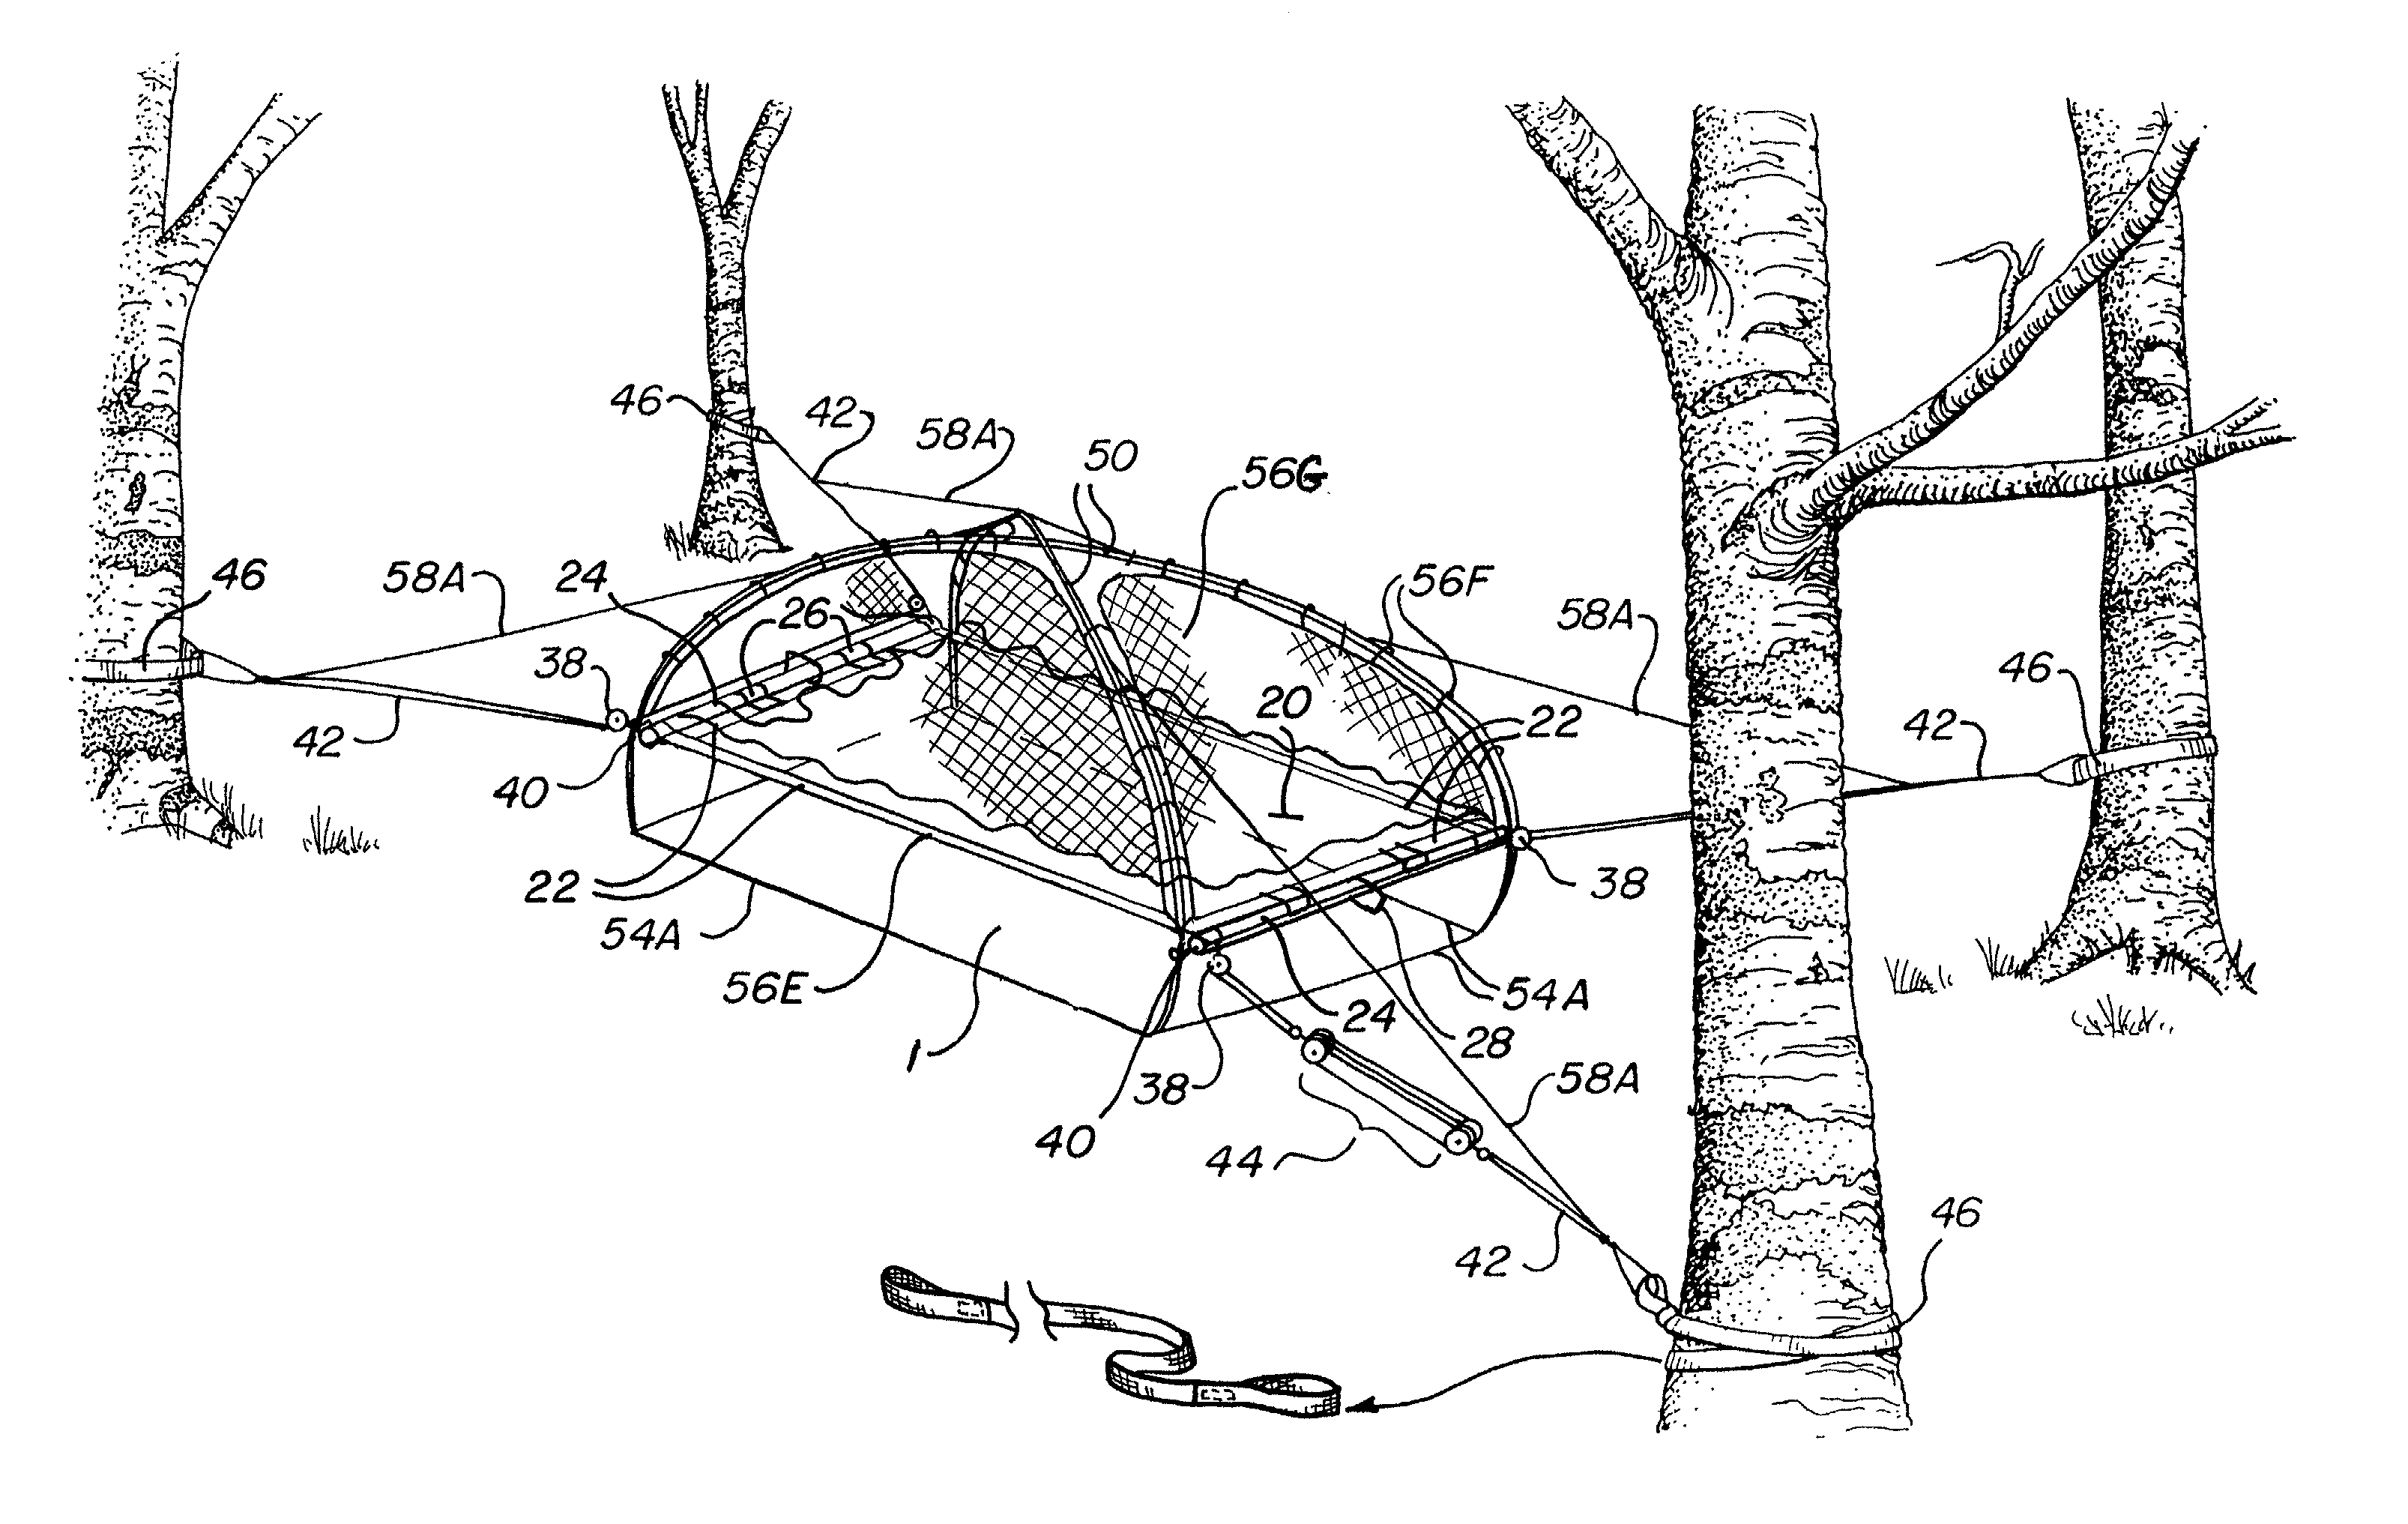 Backpacker's elevated, tensioned sleeping and observation surface with tent enclosures and method of use